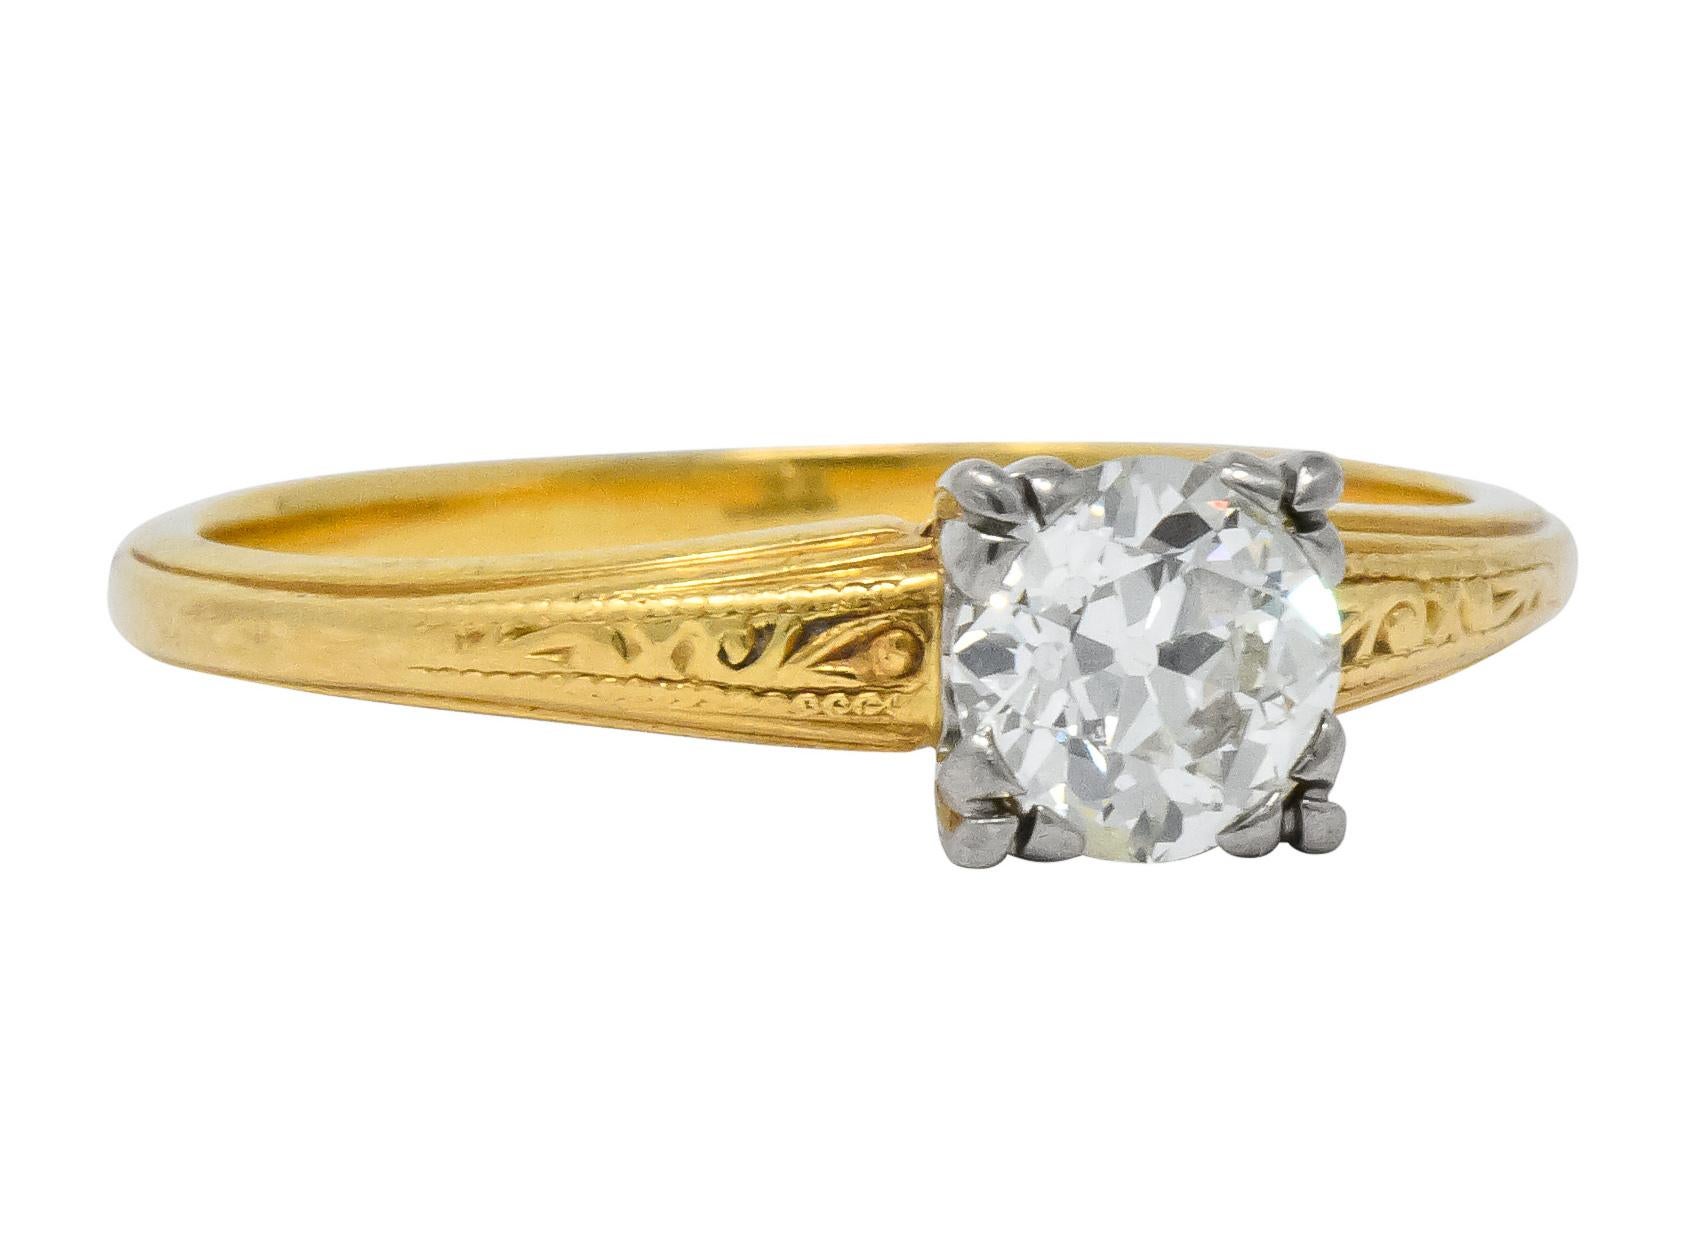 Centering an old European cut diamond weighing approximately 0.90 carat, K color and VVS clarity

Tri-prong white gold decorative head with engraved shoulders mounted on engraved yellow gold shank

Fully signed Jabel

Stamped 18k

Circa 1920's

Ring